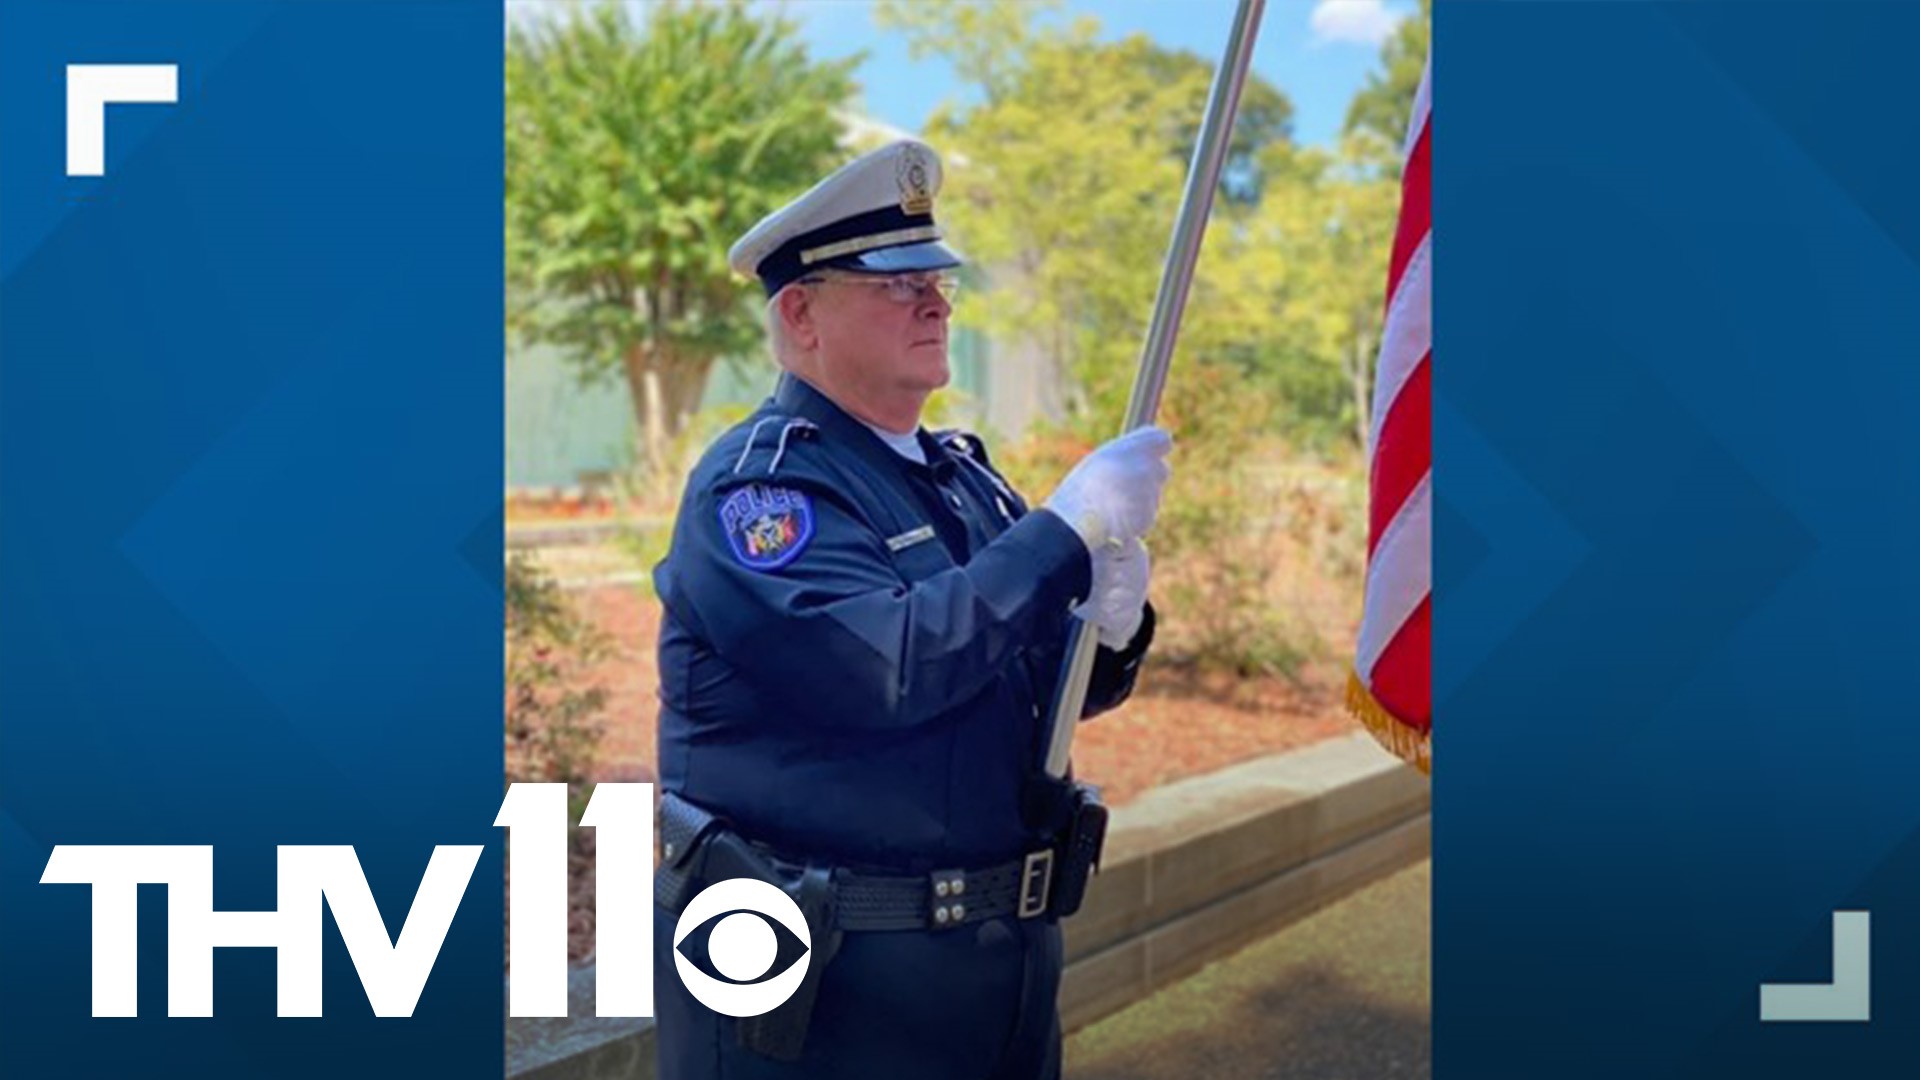 The North Little Rock Police Department announced the passing of Sgt. J.L. “Buck” Dancy, after batting COVID-19.